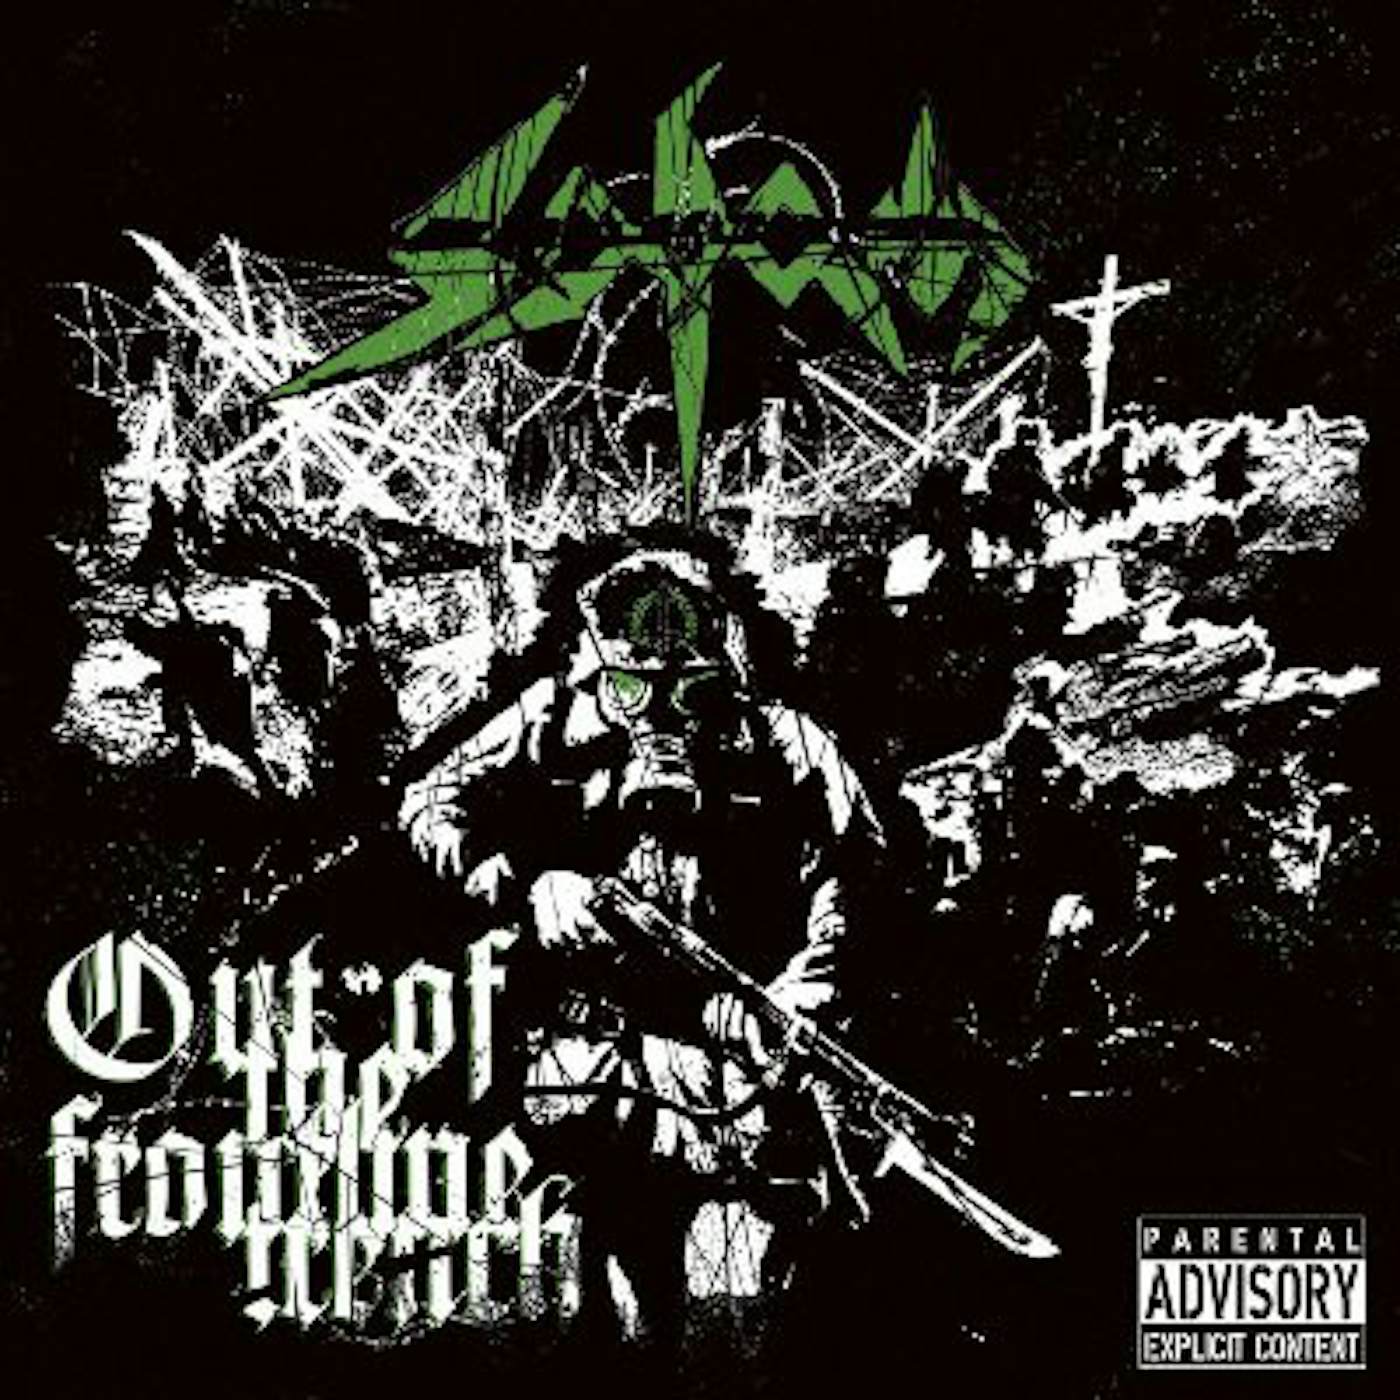 Sodom OUT OF THE FRONTLINE TRENCH CD